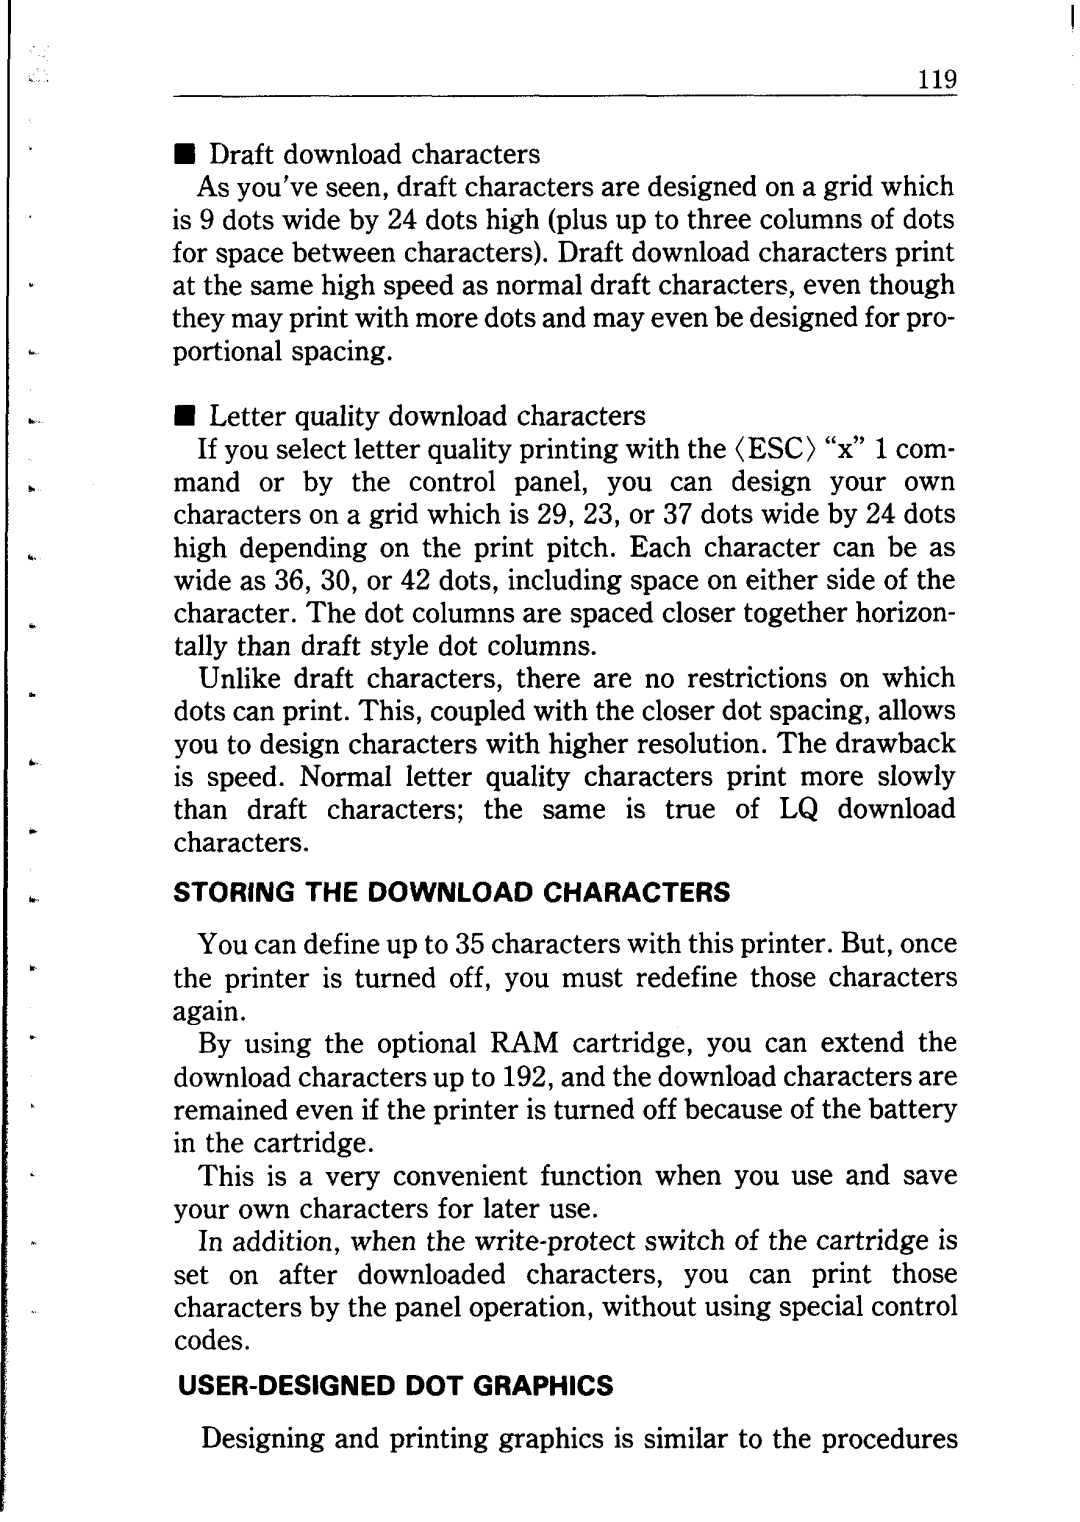 Star Micronics NB24-10/15 user manual STORlNG THE DOWNLOAD CHARACTERS, User-Designed Dot Graphics 